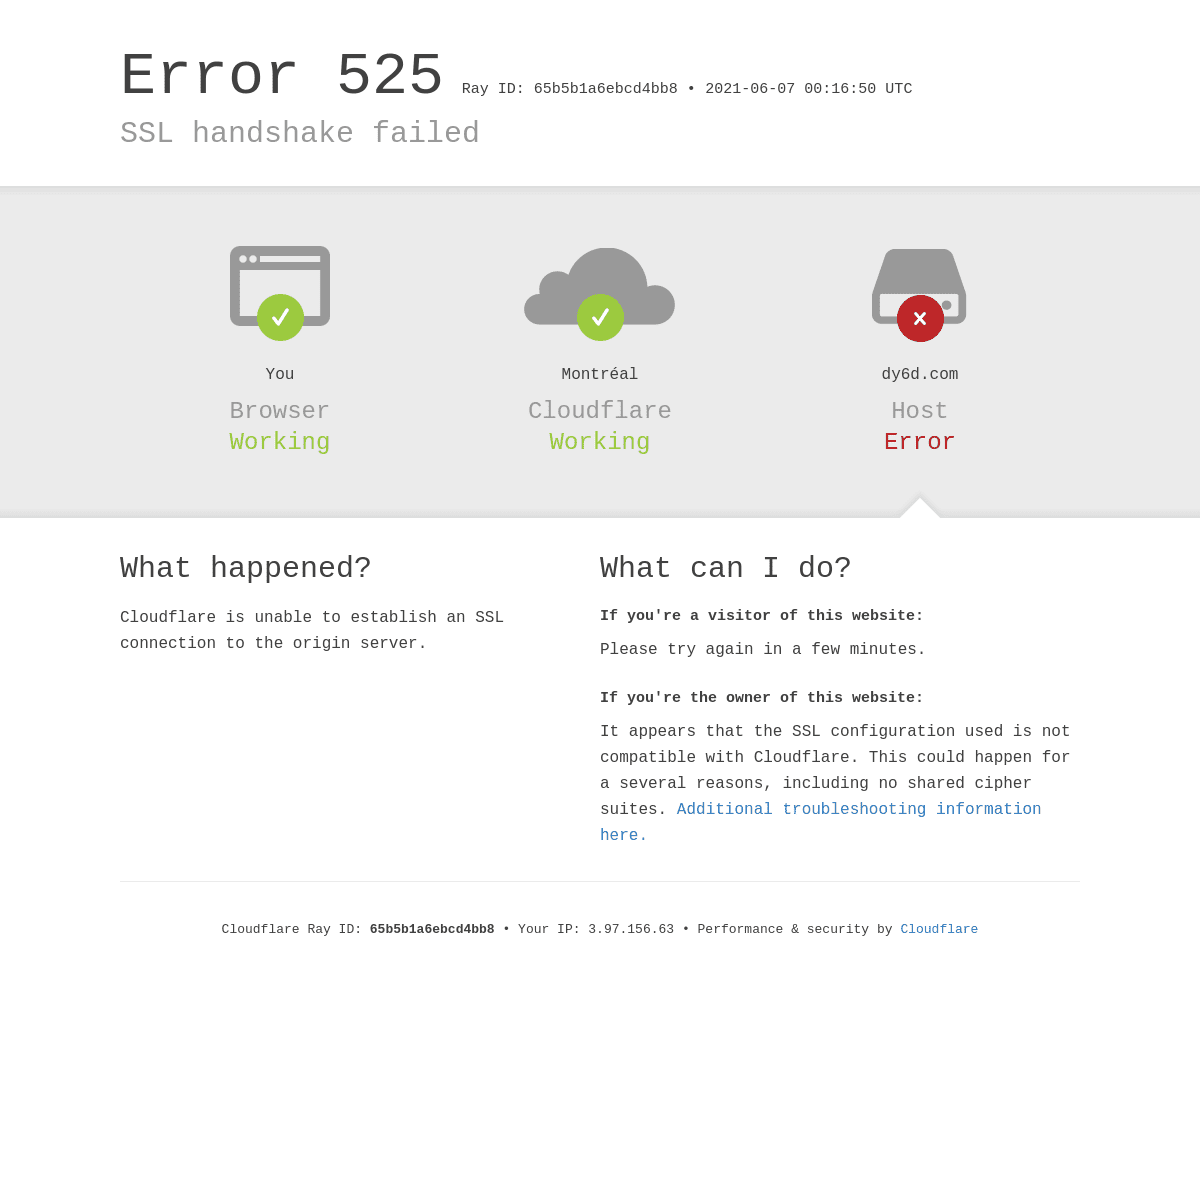 A complete backup of https://dy6d.com